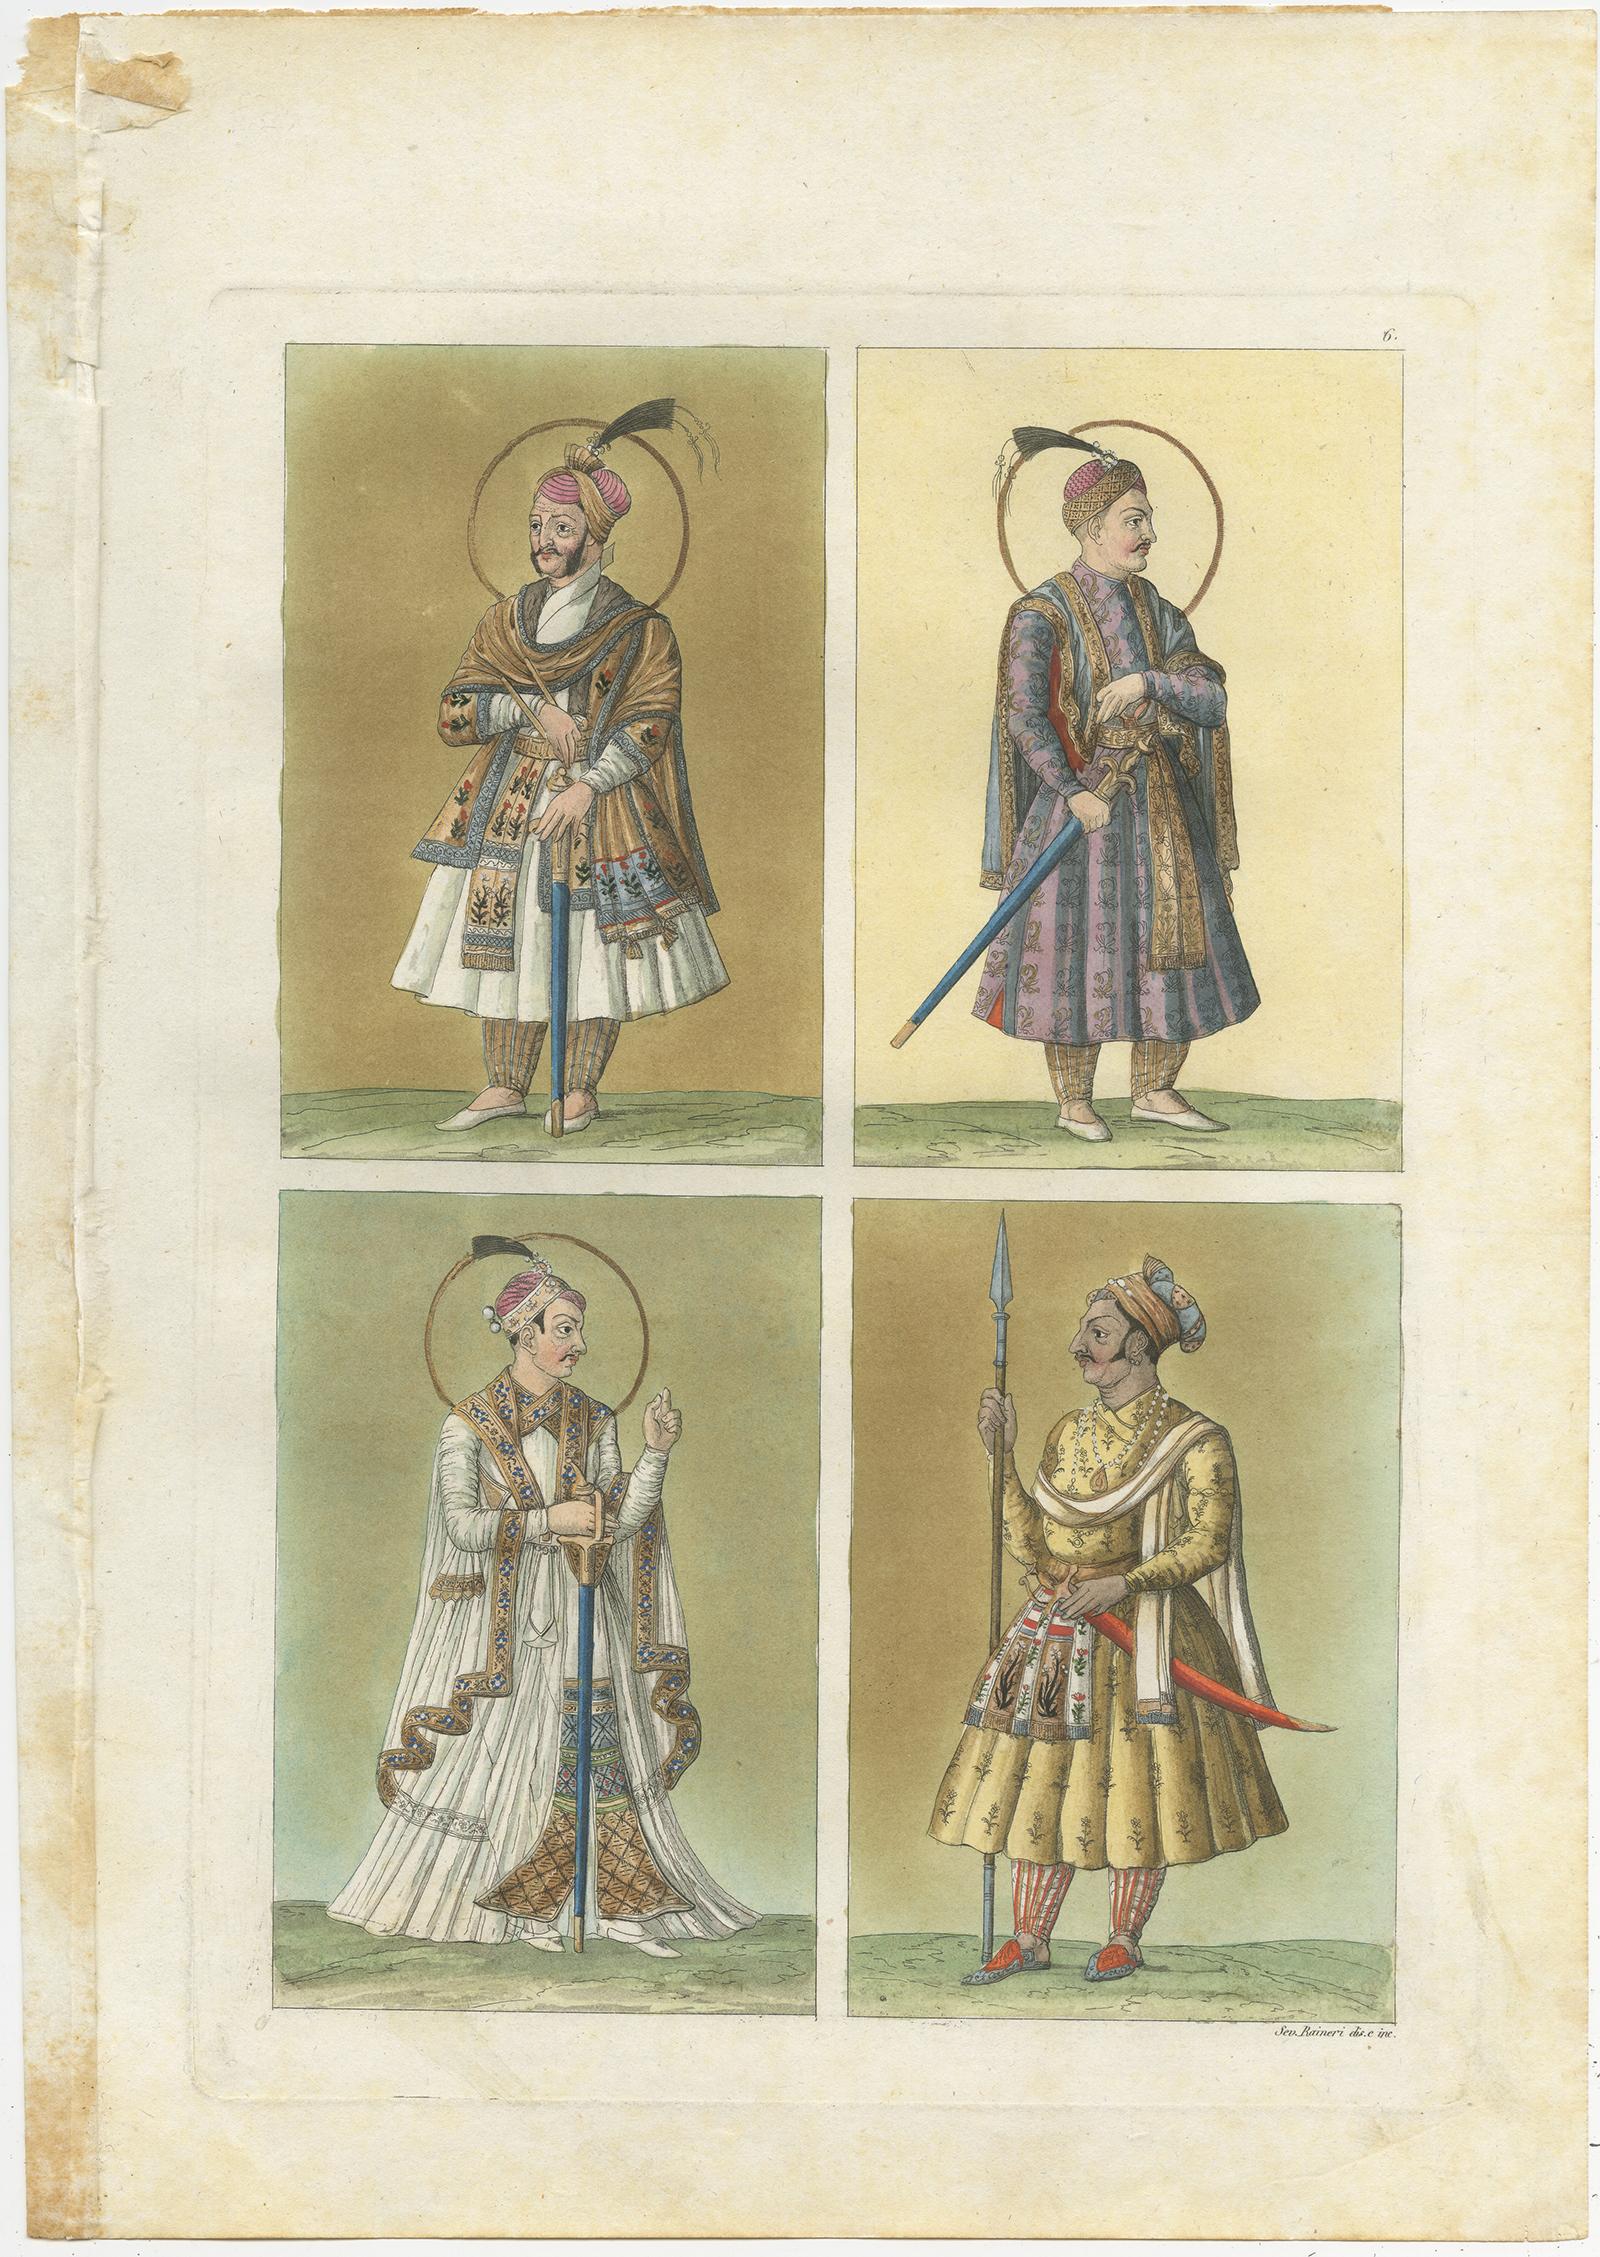 Set of five antique prints with Hindustan miniatures, drawn from a collection of portraits. These prints originate from 'Costume Antico e Moderno: Palestine, China, India, Oceania' by Ferrario. Published 1831.